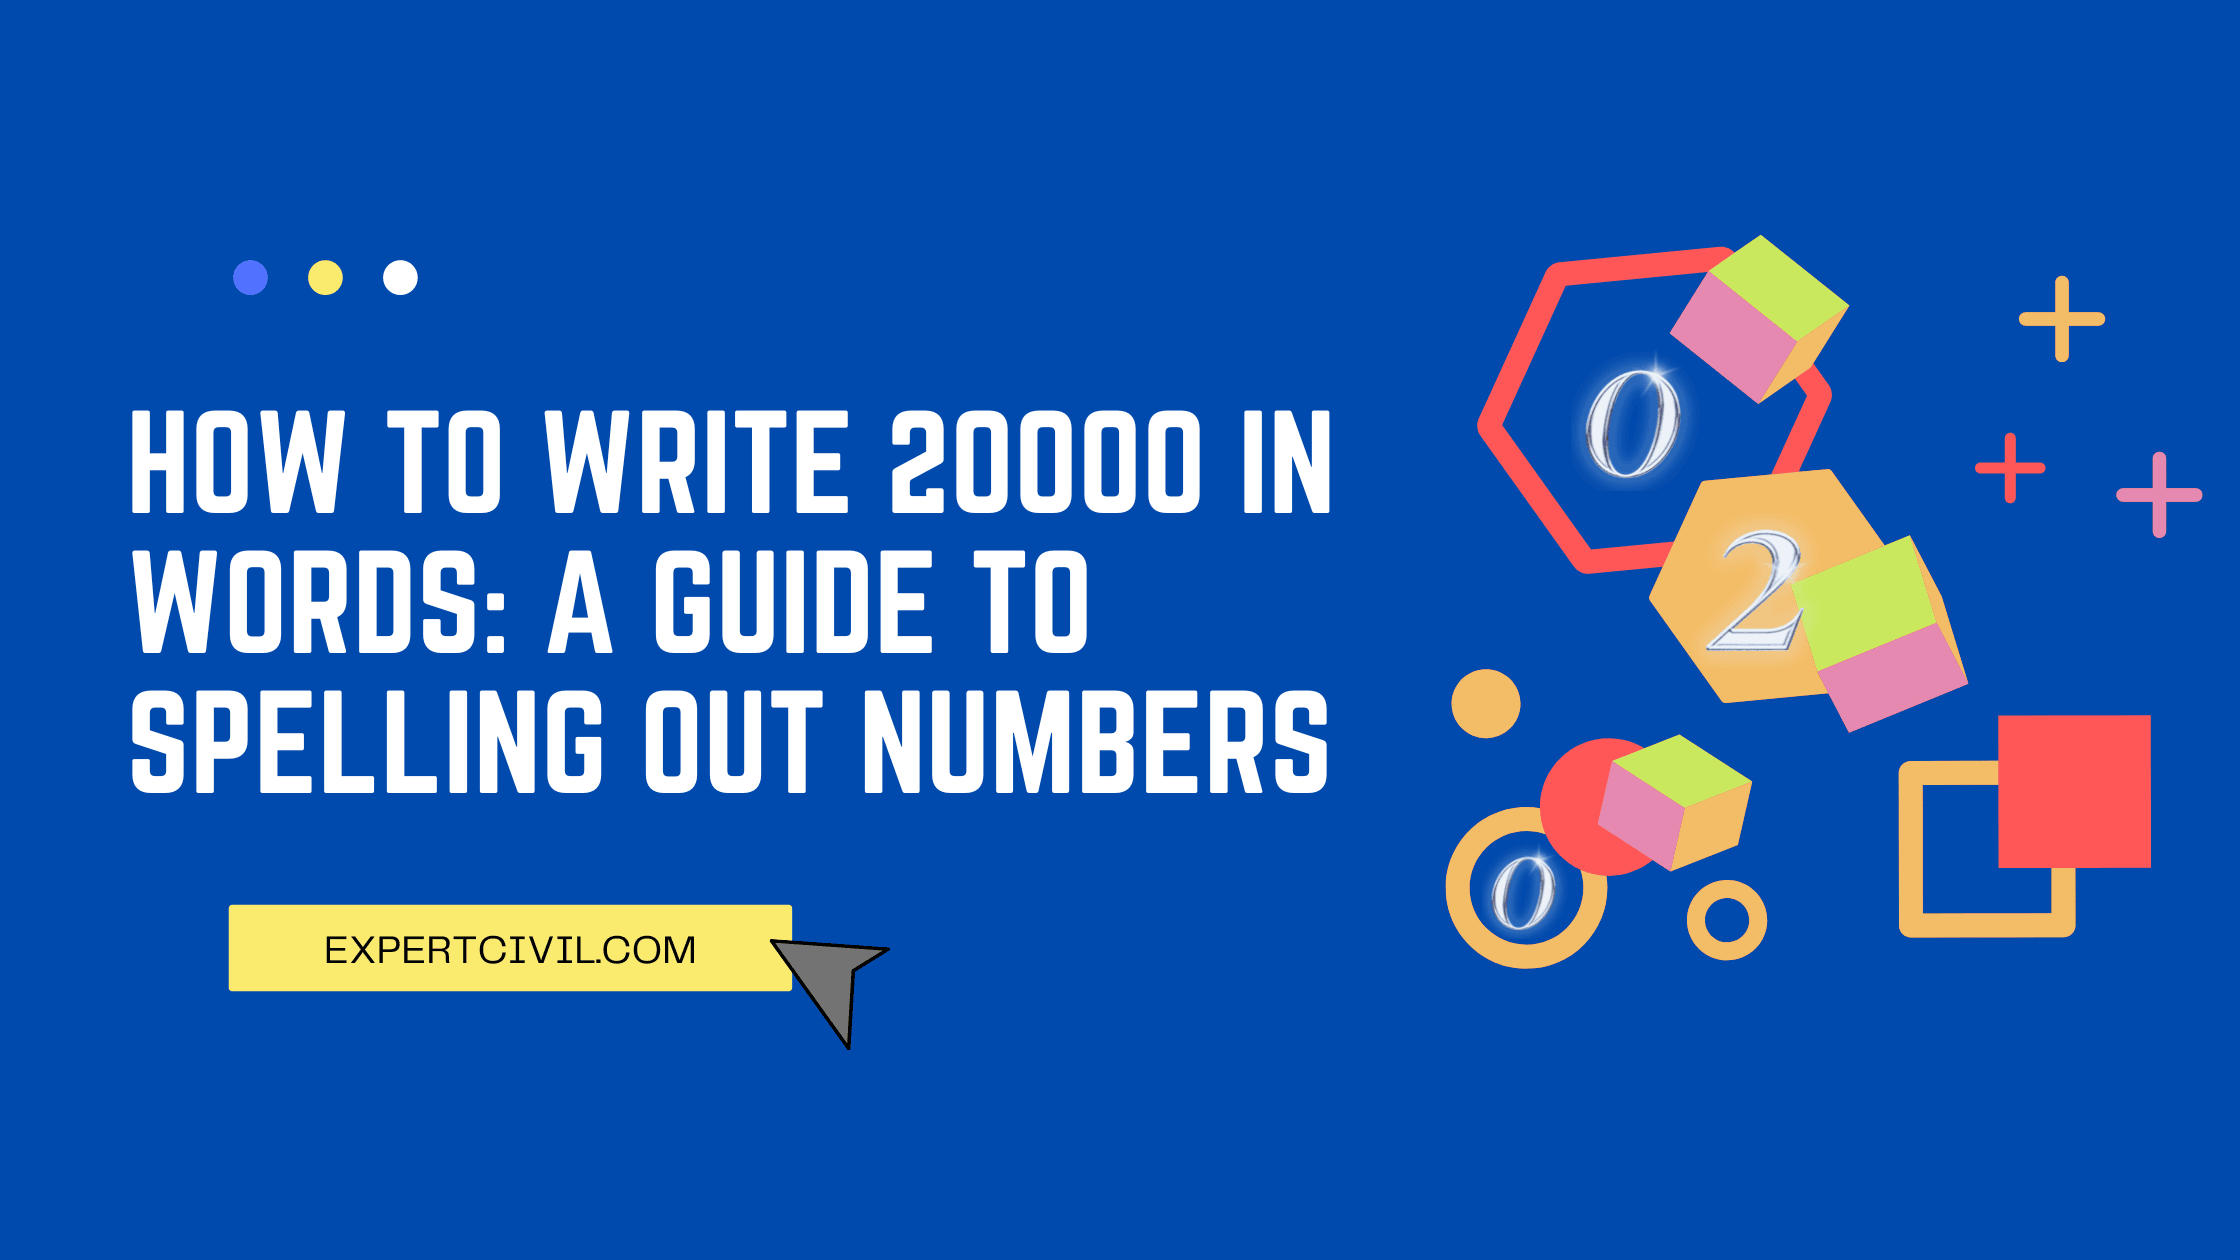 How to Write 20000 in Words?